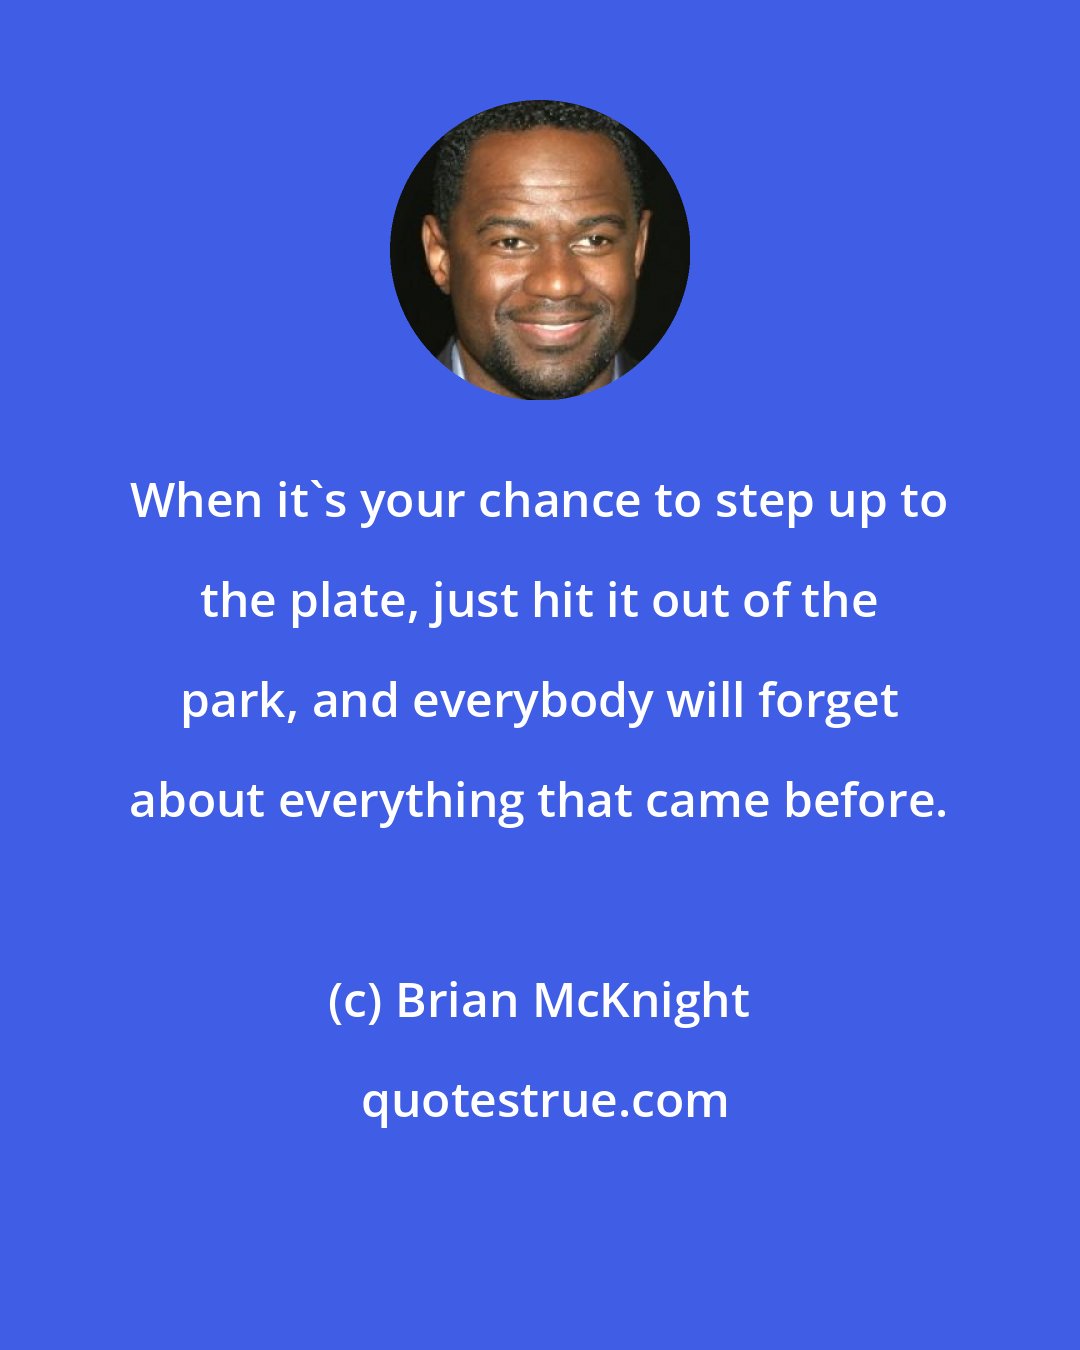 Brian McKnight: When it's your chance to step up to the plate, just hit it out of the park, and everybody will forget about everything that came before.